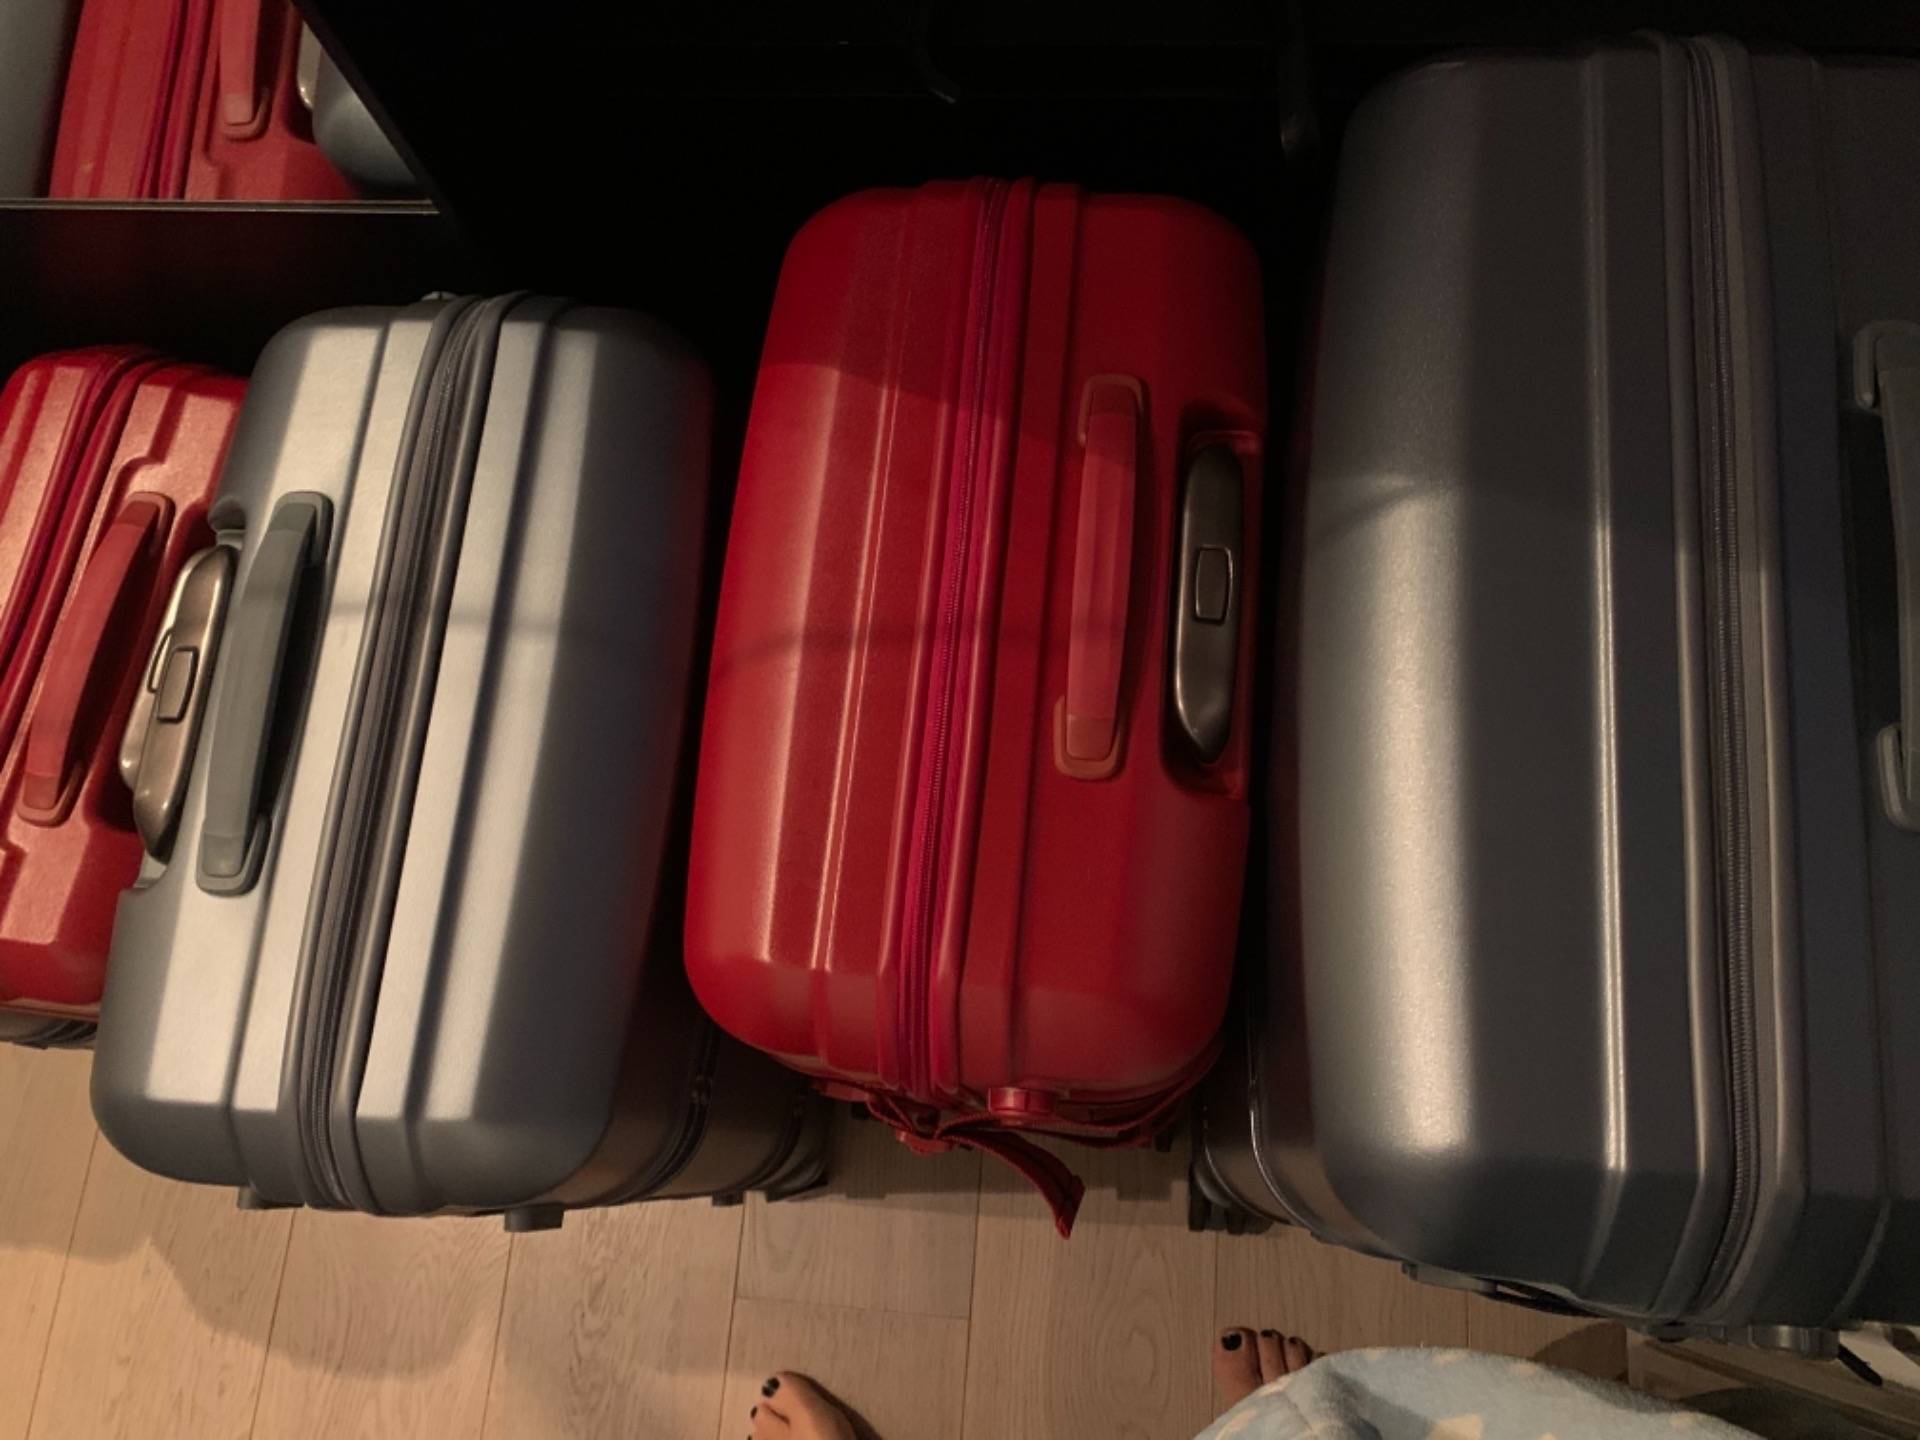 # source : my personal suitcases and my toes in the picture